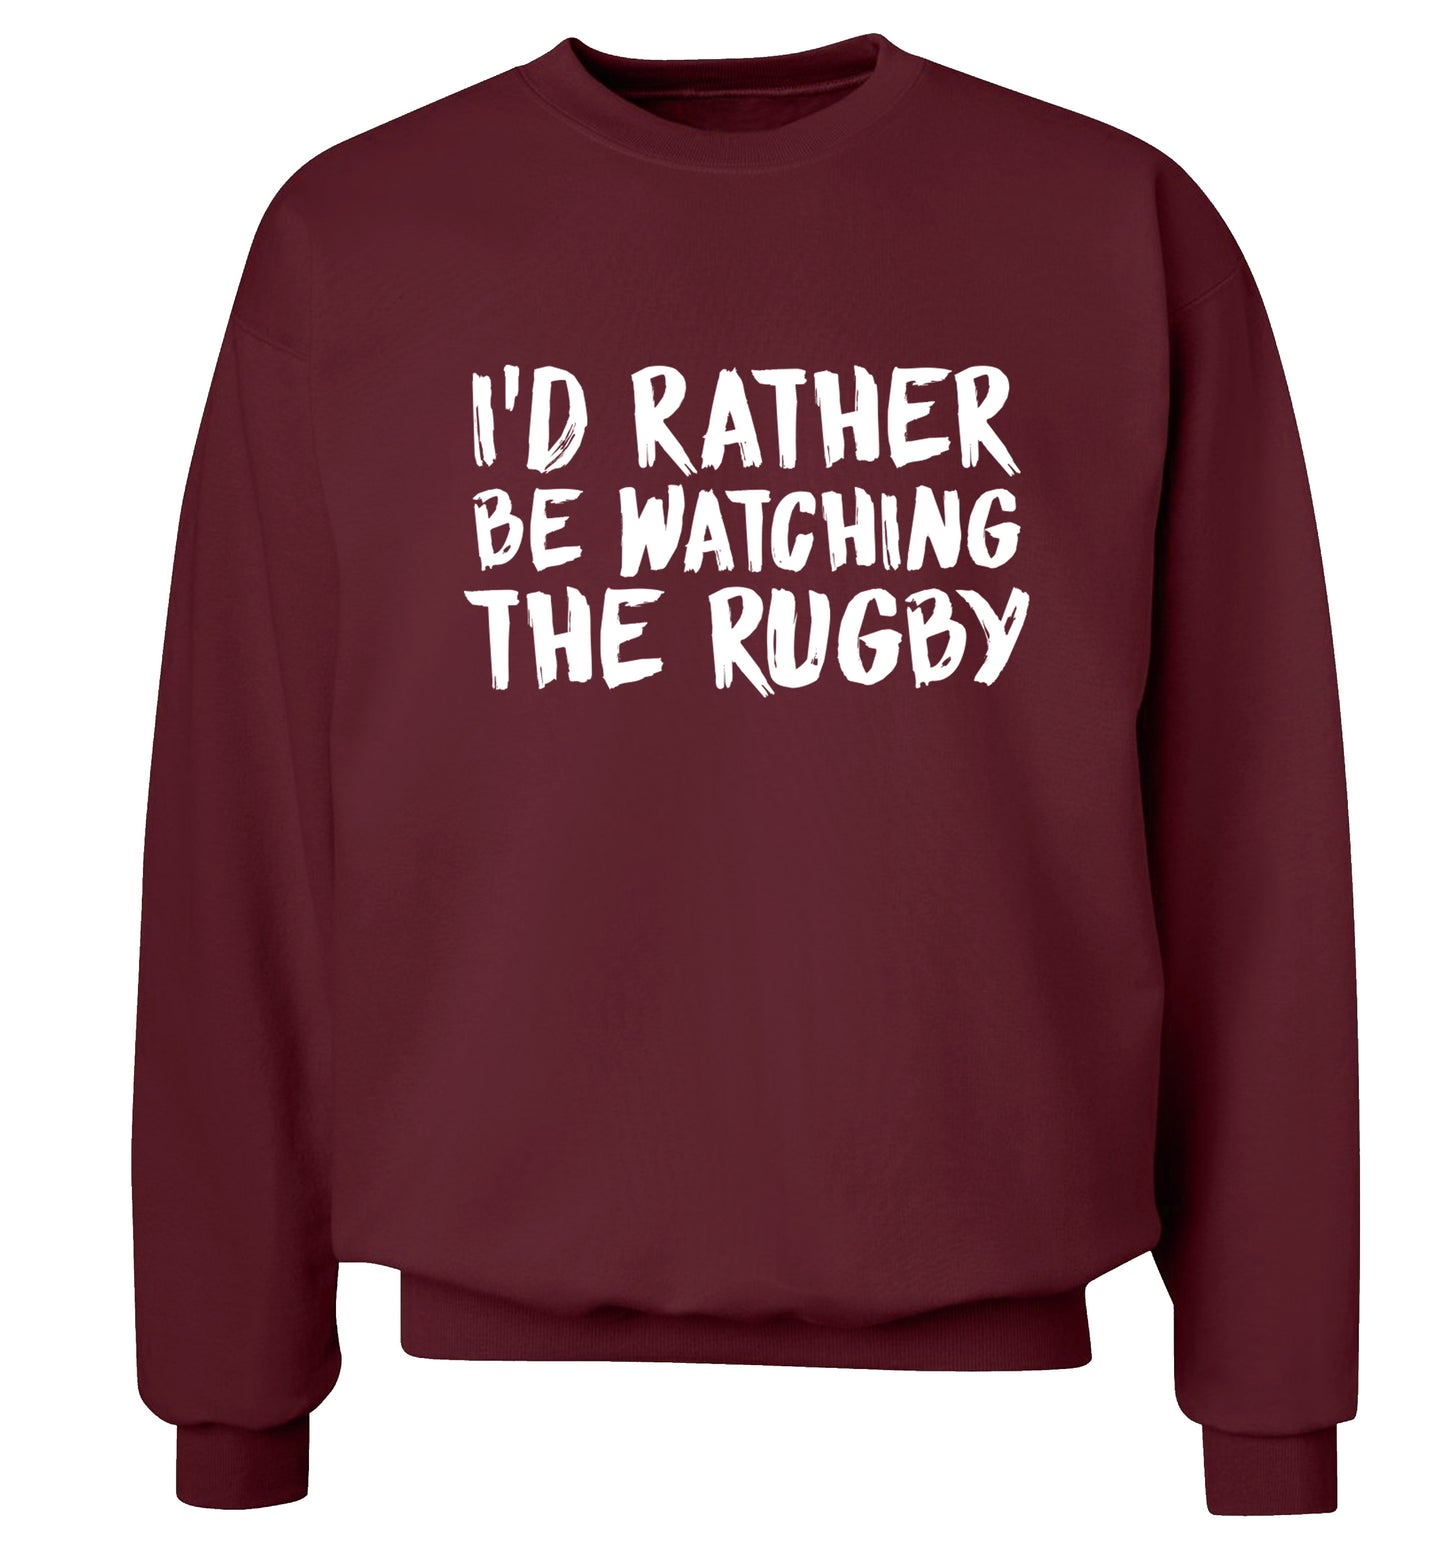 I'd rather be watching the rugby Adult's unisex maroon Sweater 2XL